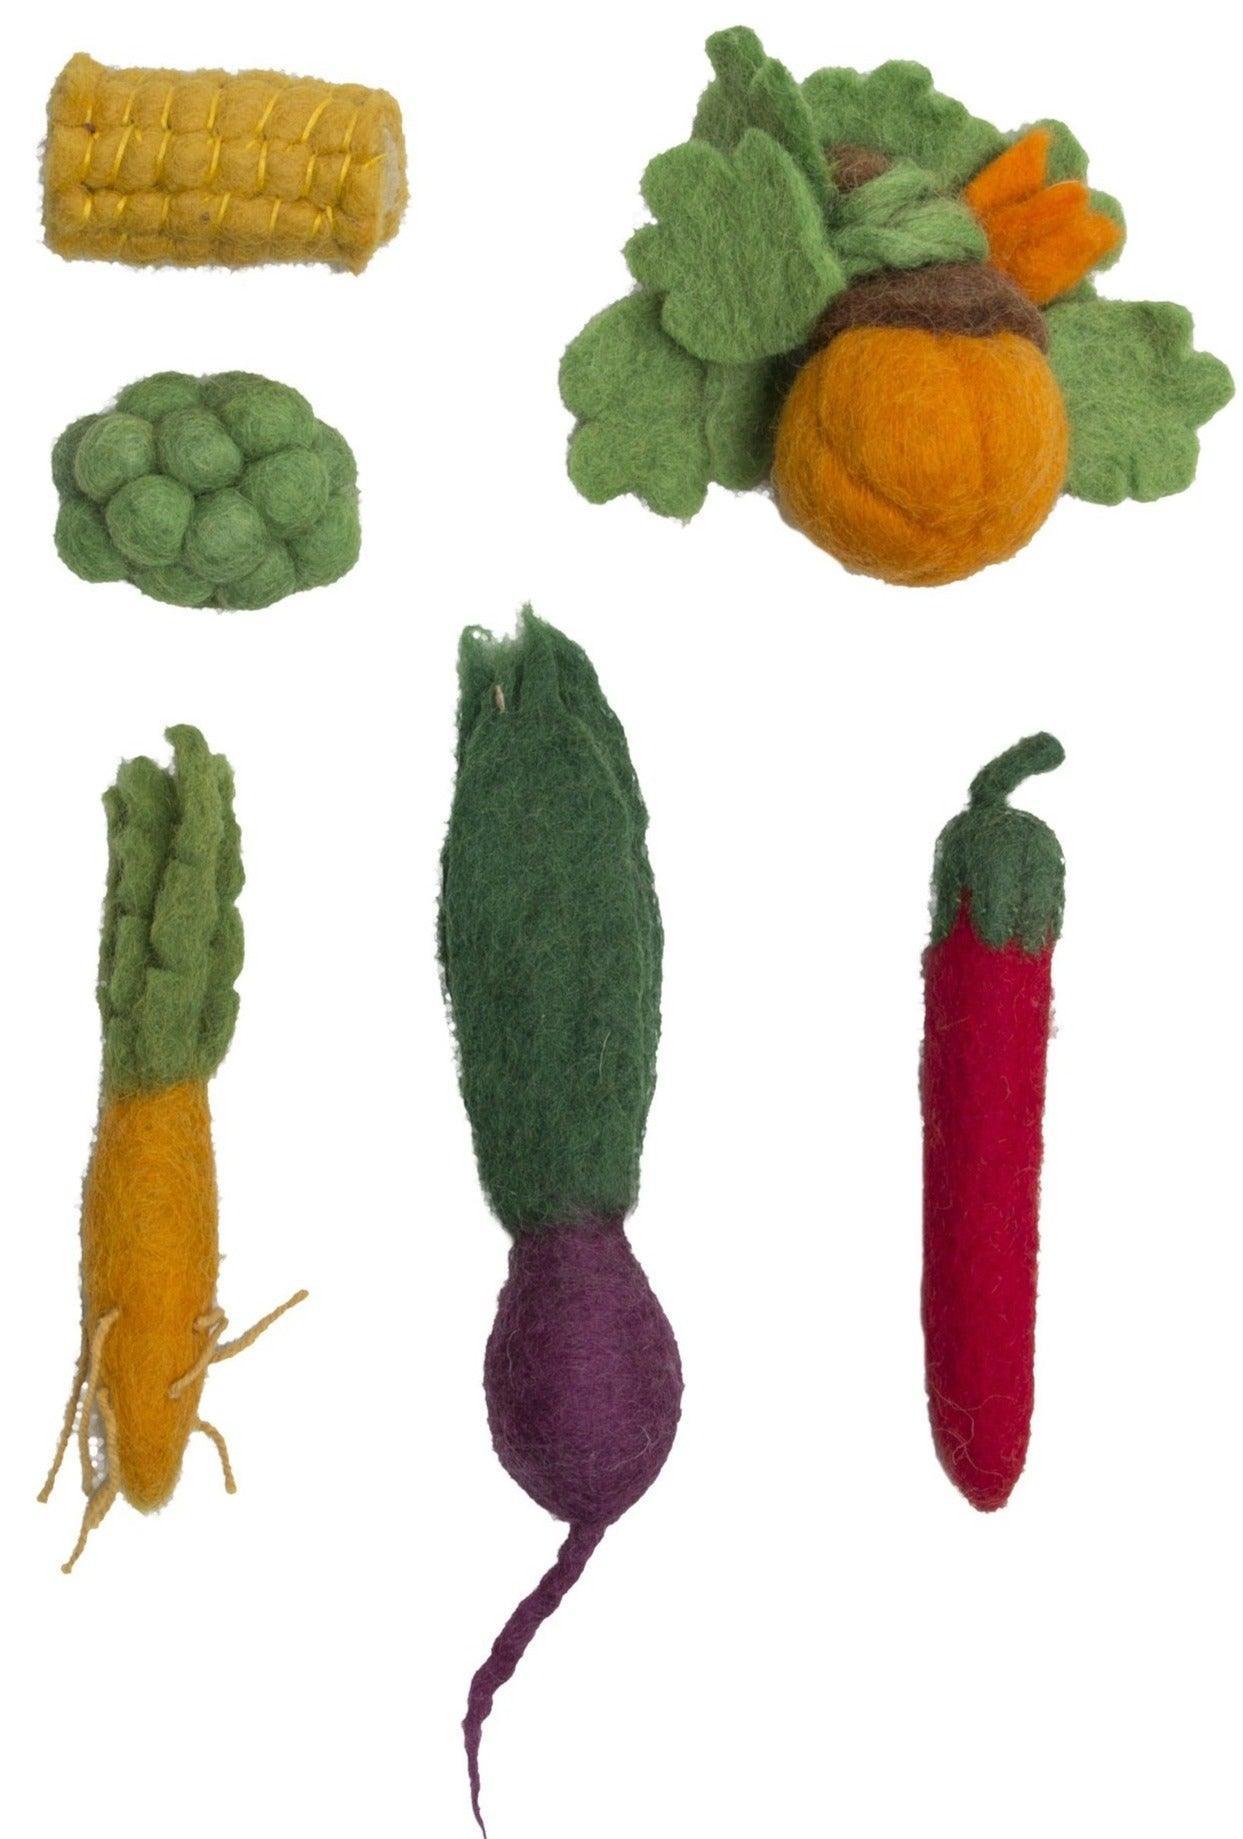 Papoose Mini Felt Vegetable Set, 6 Pieces - Why and Whale